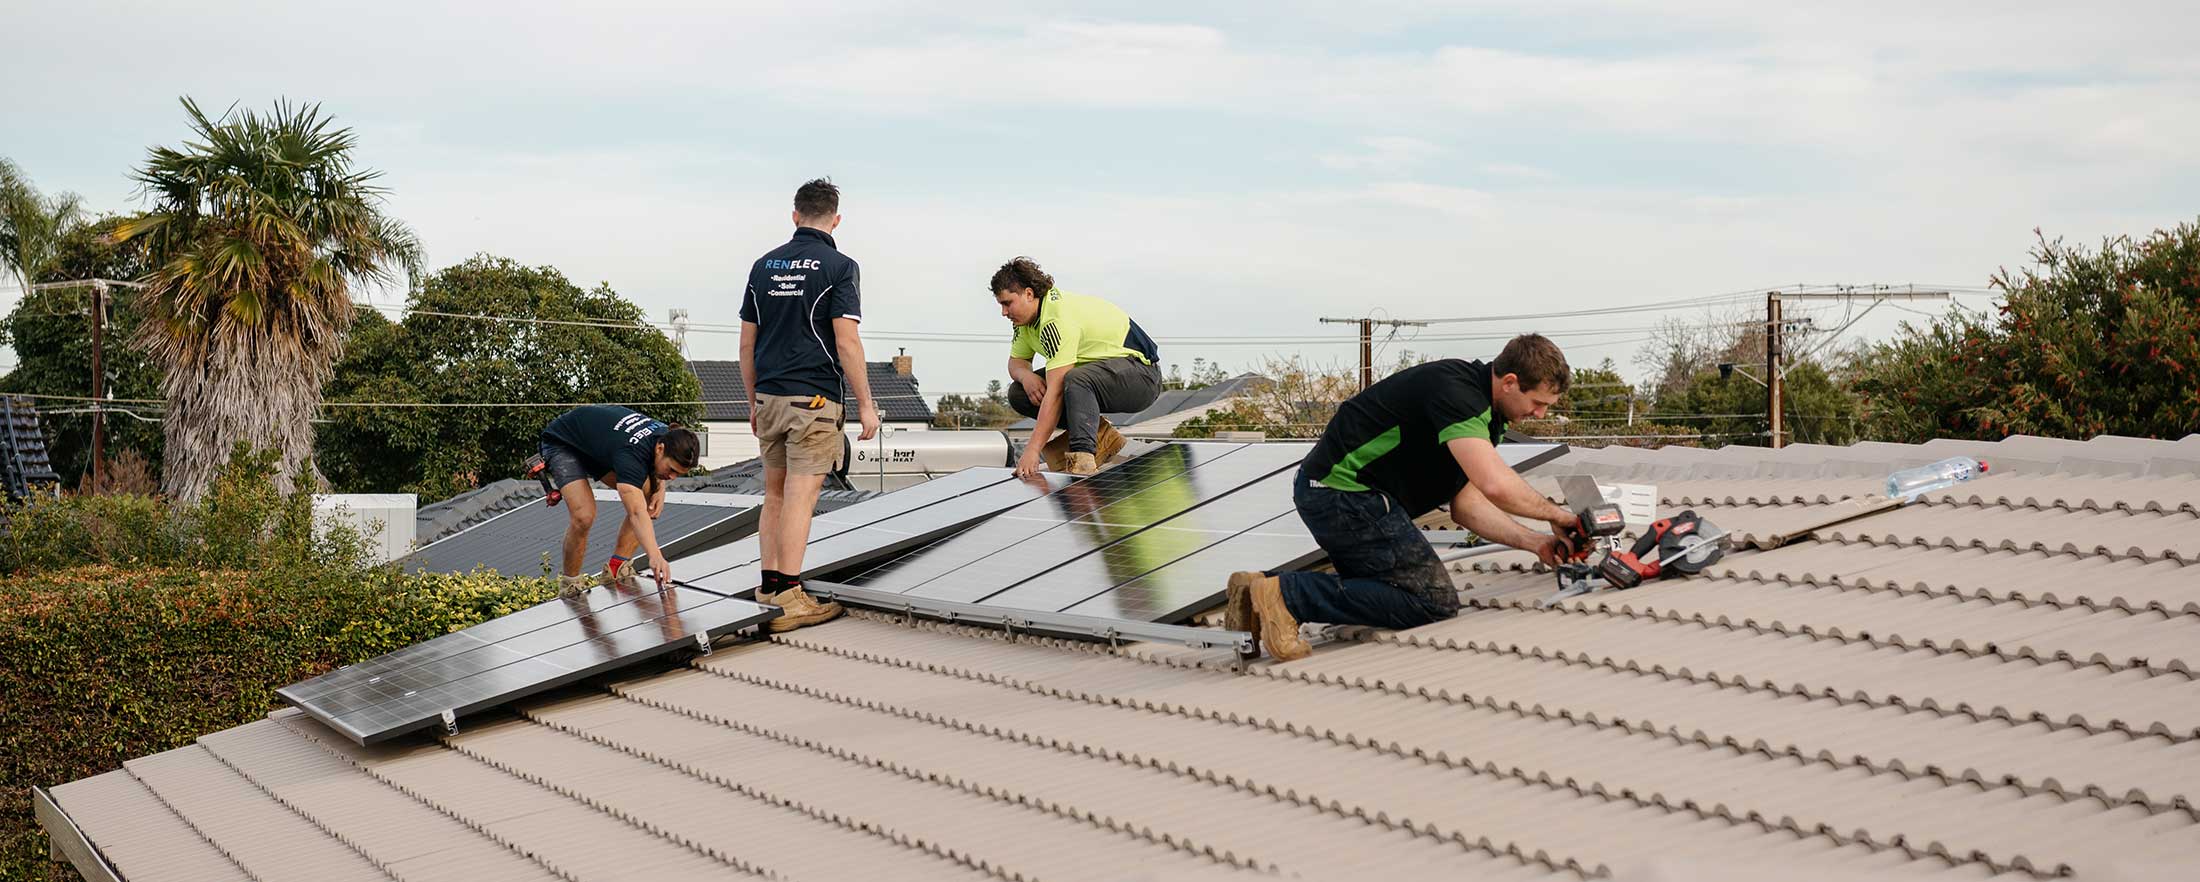 Solar Panel Installation, repair & removal in Adelaide